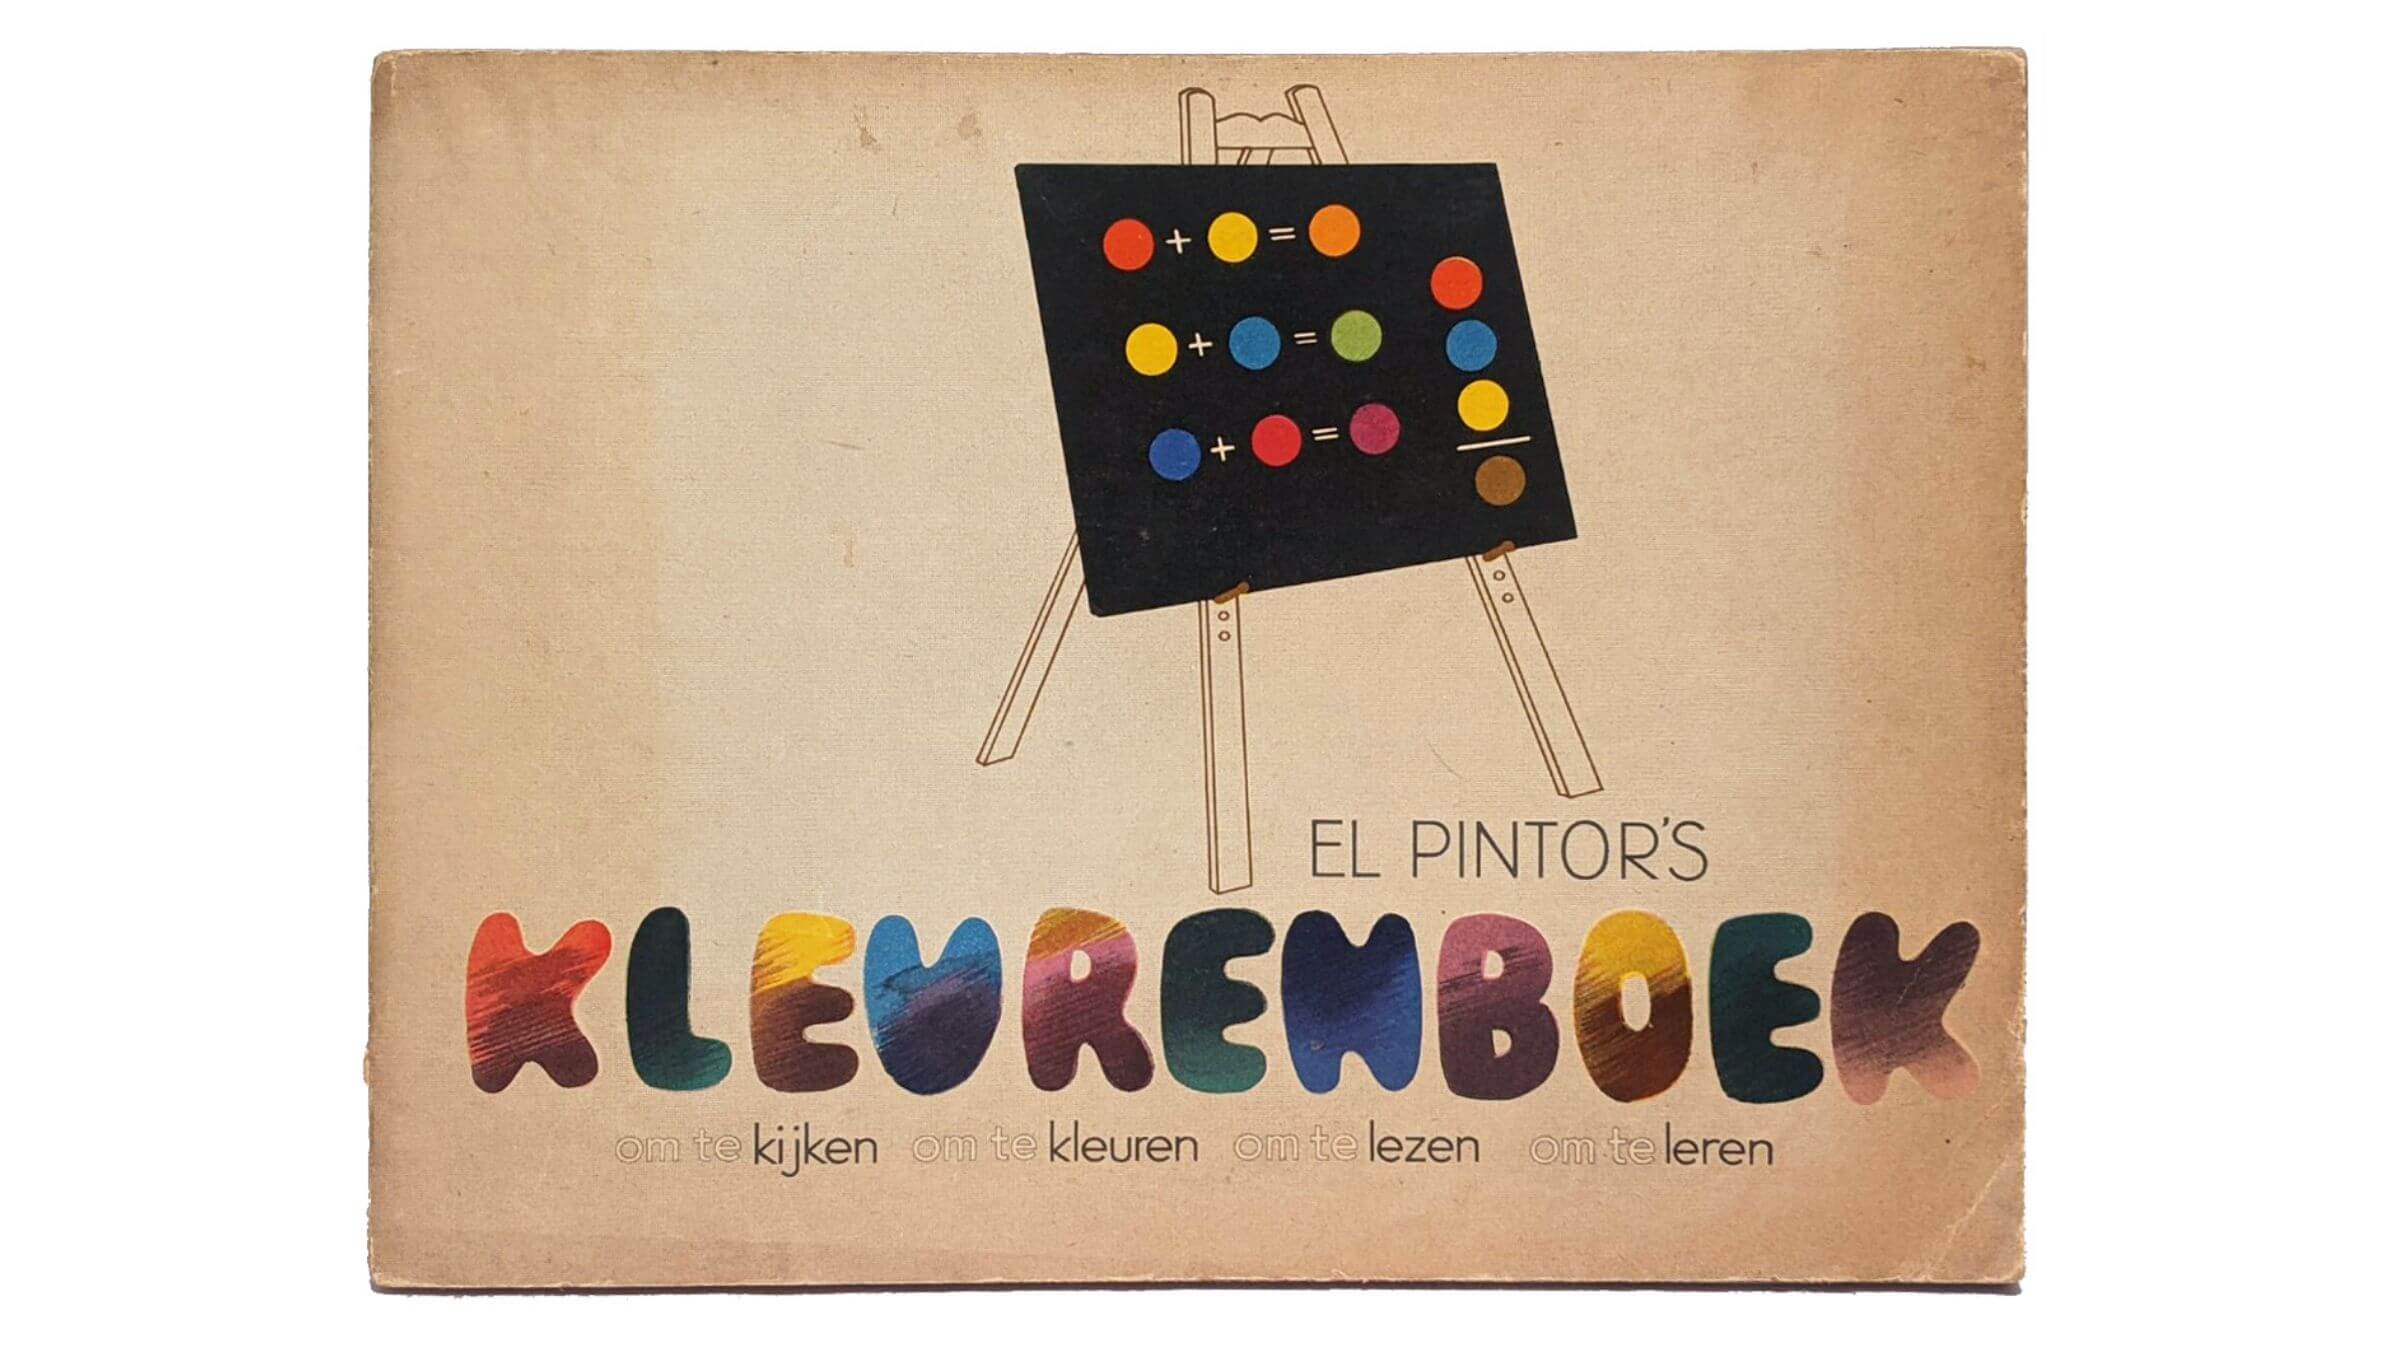 The photo shows the cover of a children's book, which is titled 'Kleurenboek' and features a many-colored canvas on an easel.